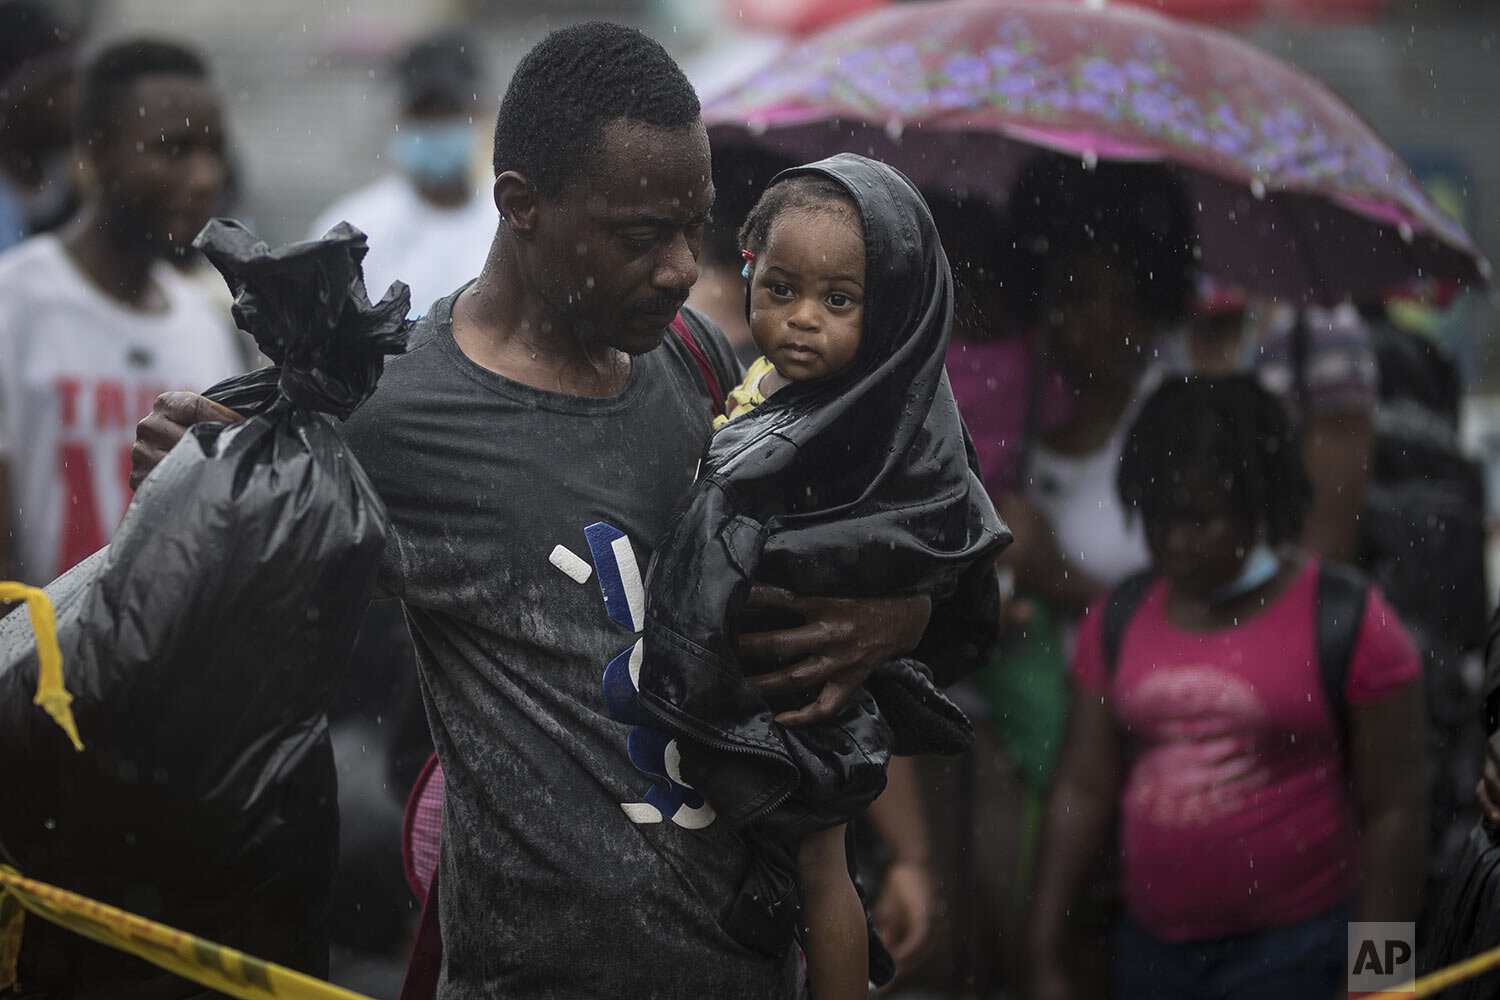  A Haitian migrant carries a baby to a boat that will take them to Capurgana, on the border with Panama, from Necocli, Colombia, early Thursday, July 29, 2021. Migrants have been gathering in Necocli as they move north towards Panama on their way to 